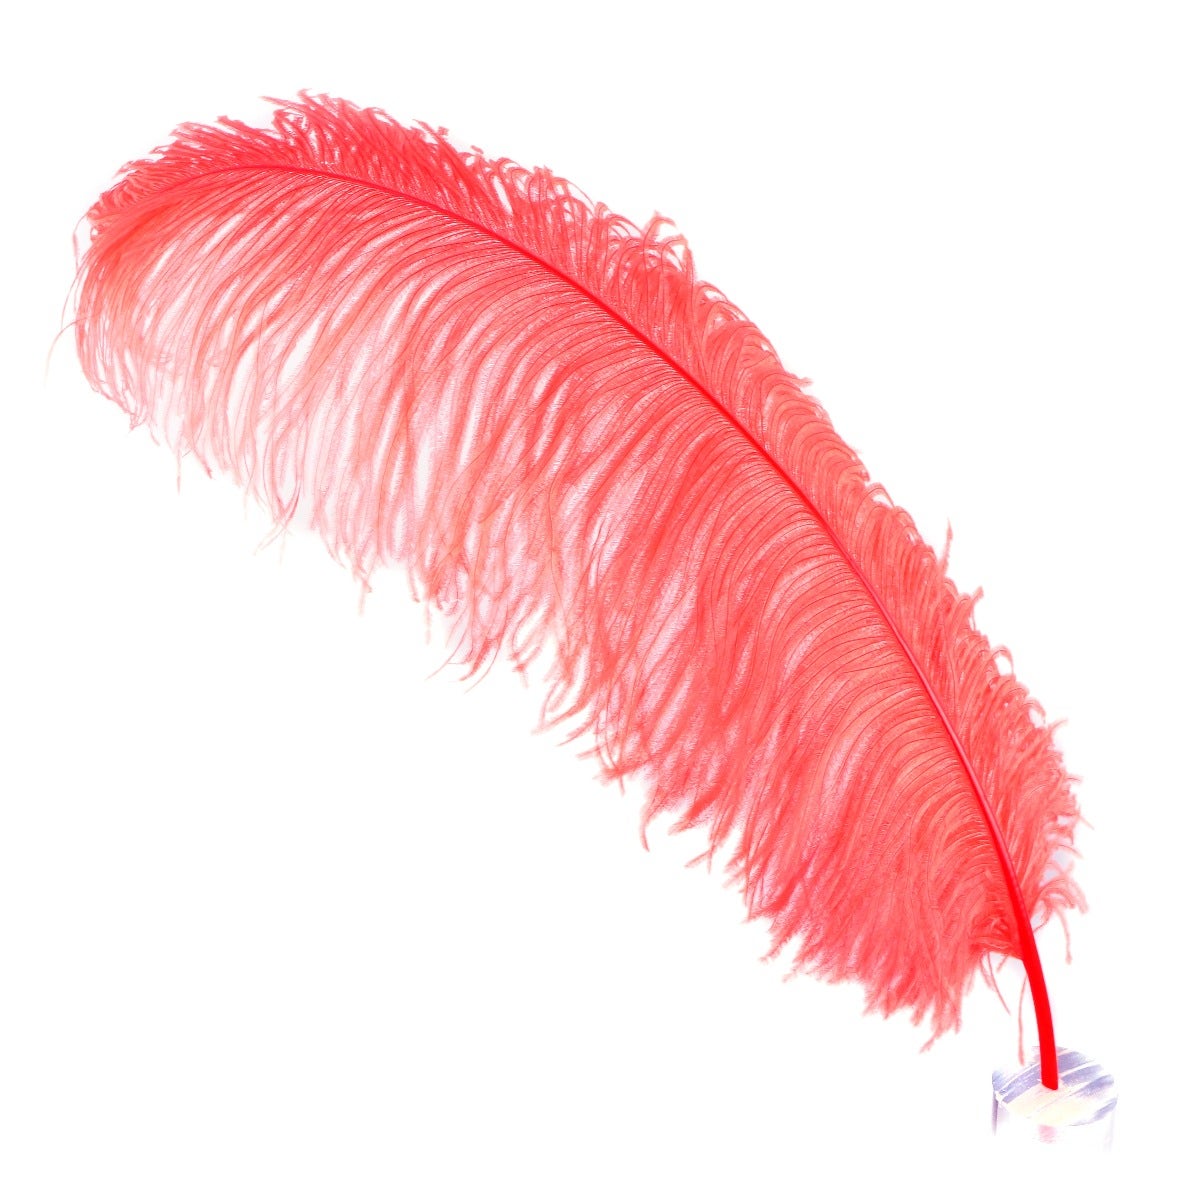 Large Ostrich Feathers - 20-25" Prime Femina Plumes - Coral